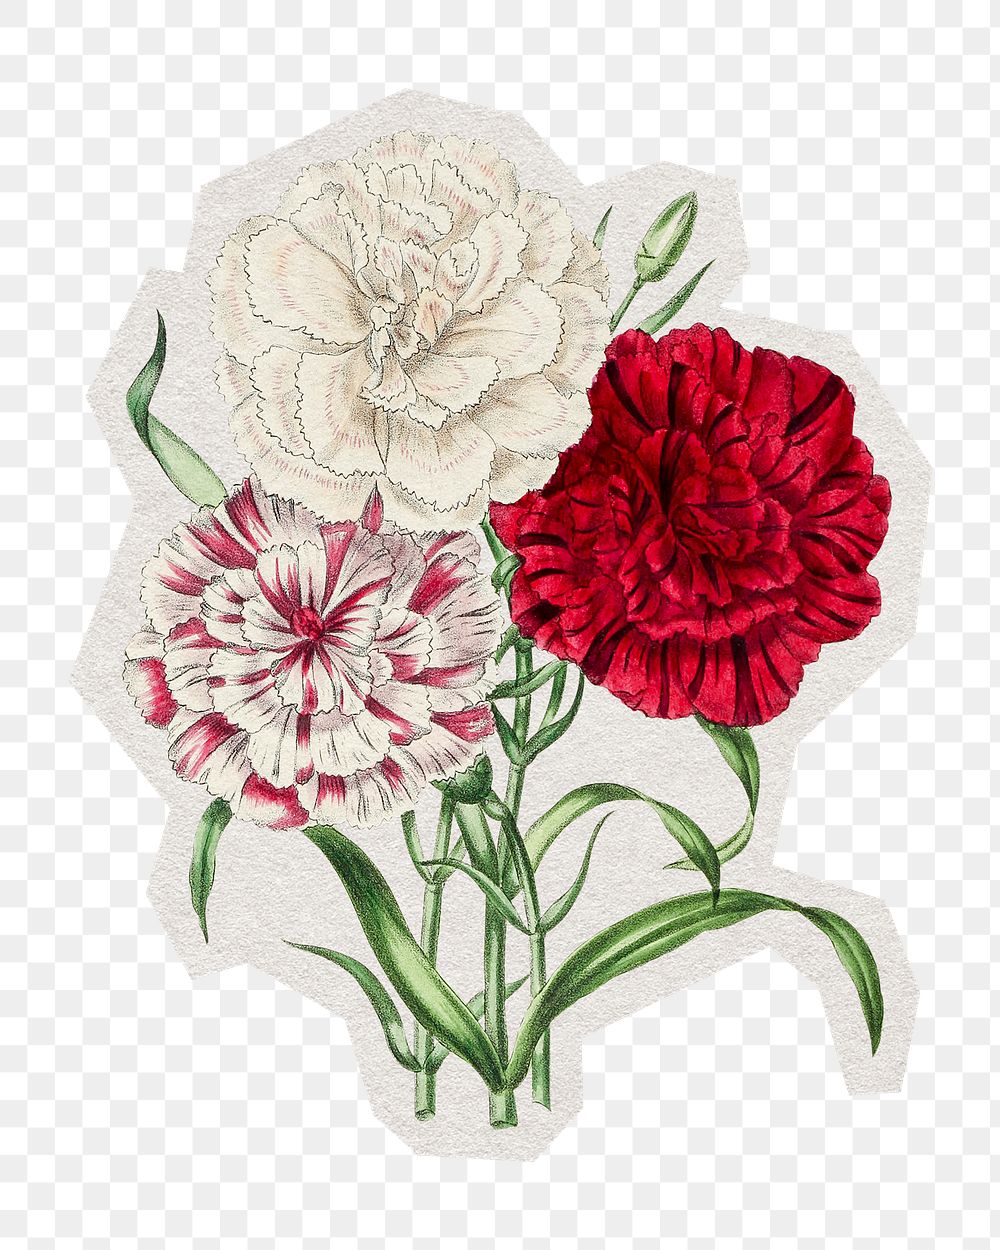 PNG hand drawn dianthus flower sticker with white border, transparent background 